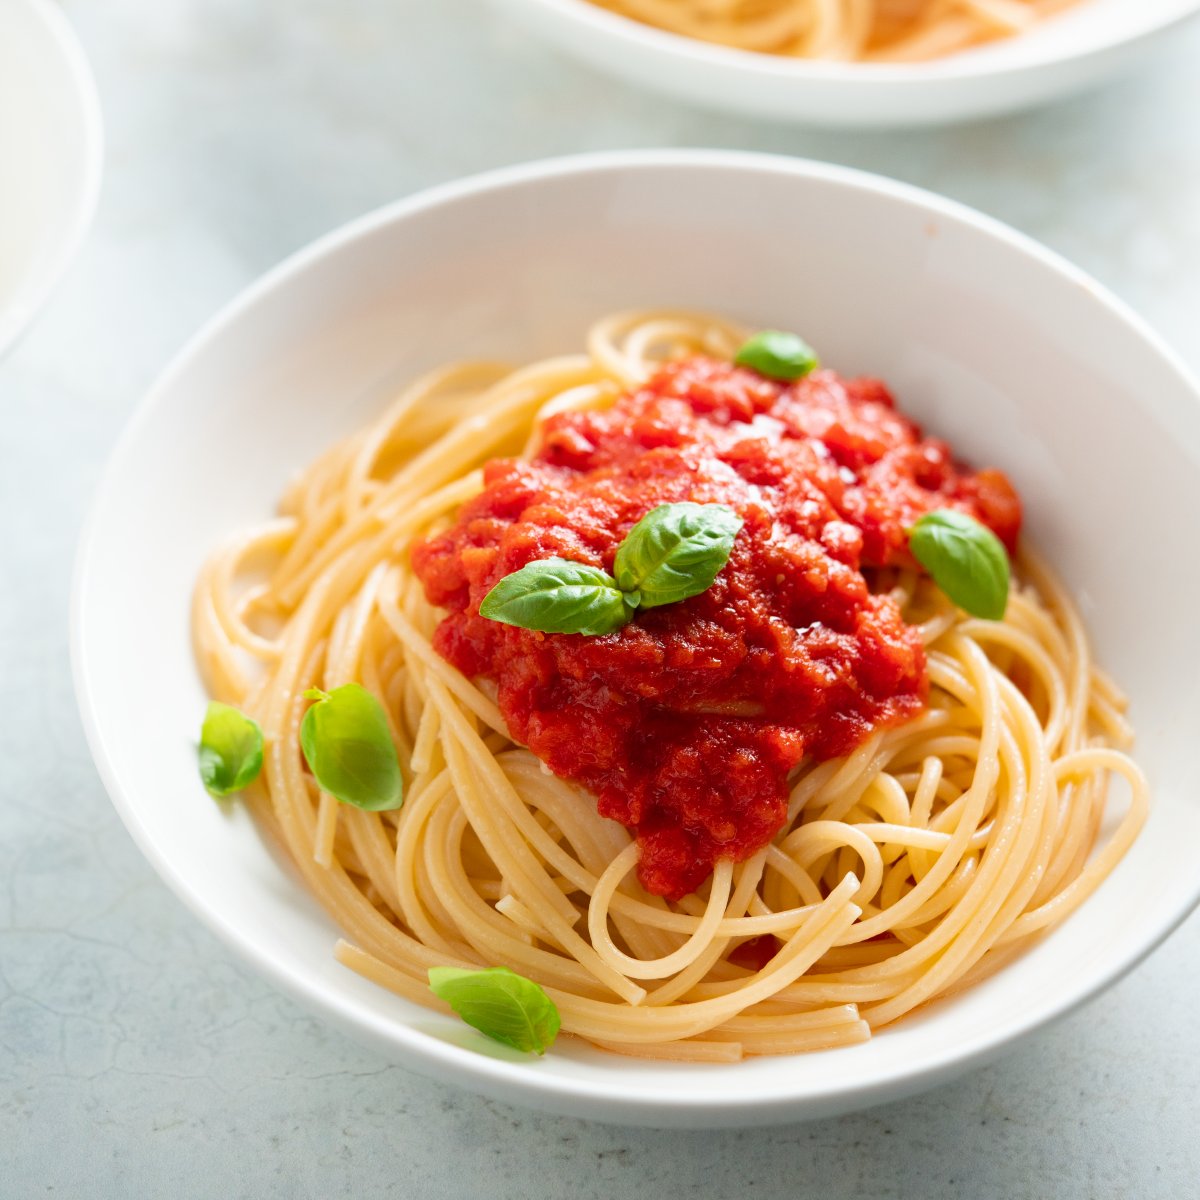 It's #NationalSpaghettiDay! This is the perfect excuse to swing by mercato.com and get everything you need to make your favorite spaghetti recipe delivered to your home.🍝 #pasta #Foodie